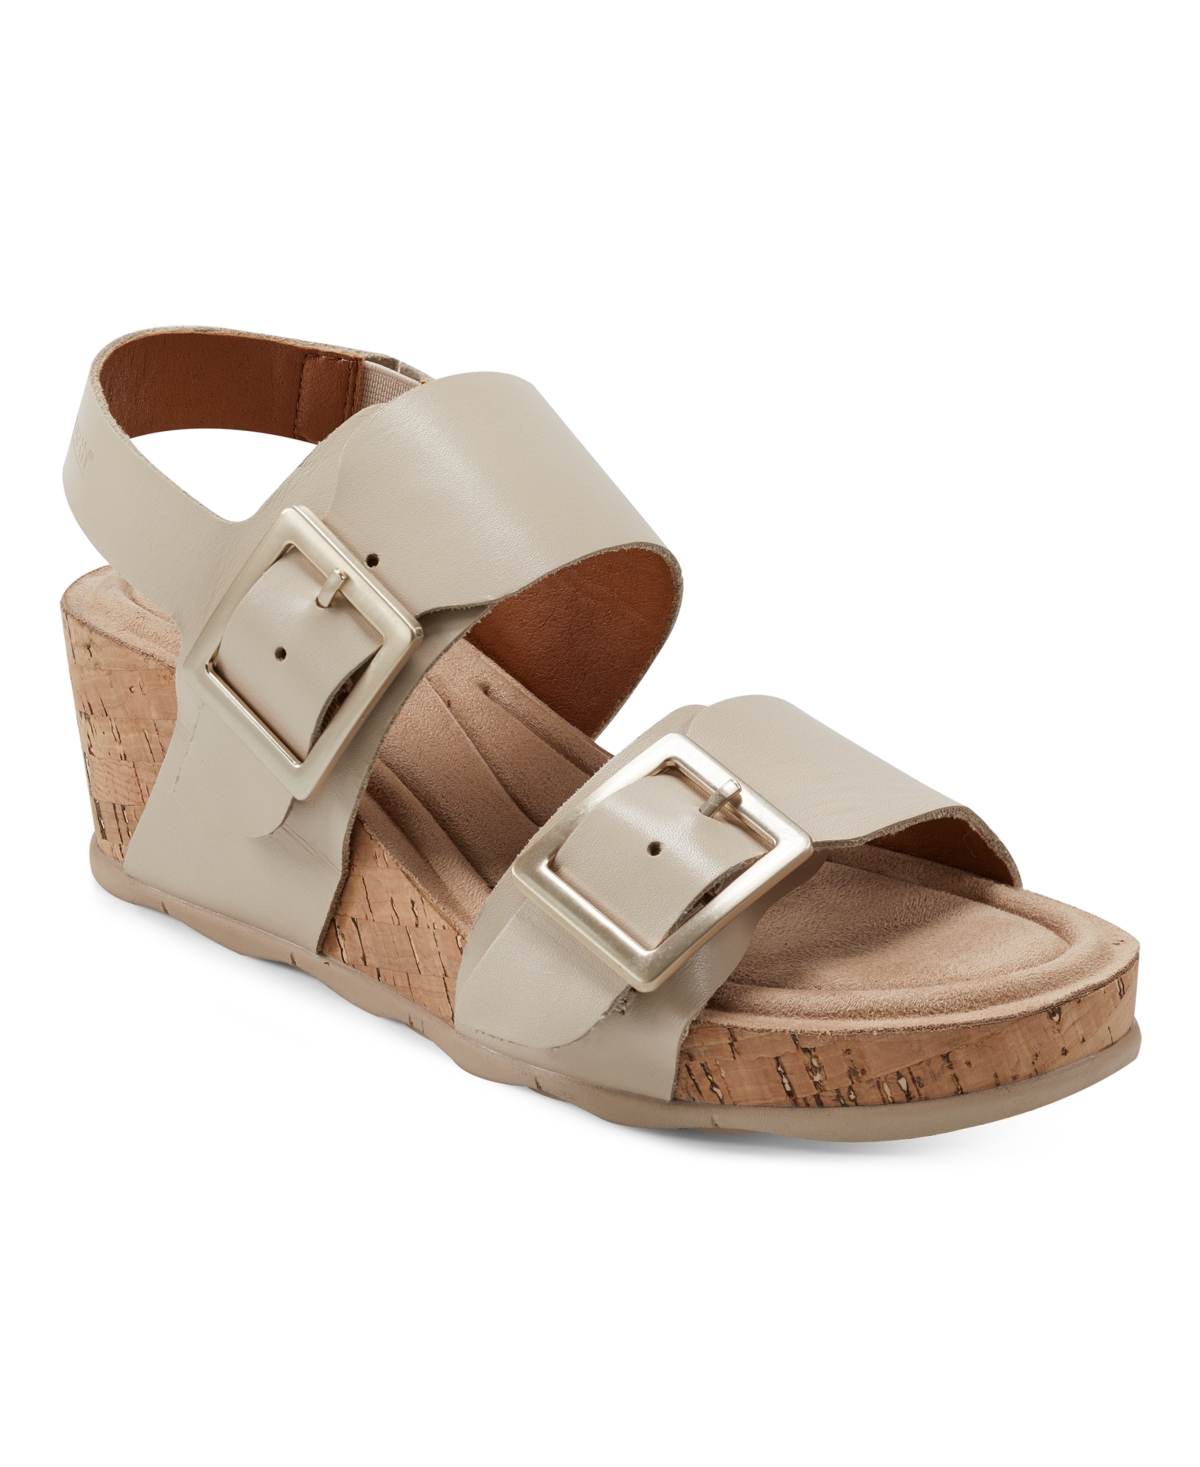 EARTH WOMEN'S WILLA STRAPPY CASUAL MID CORK WEDGE SANDALS